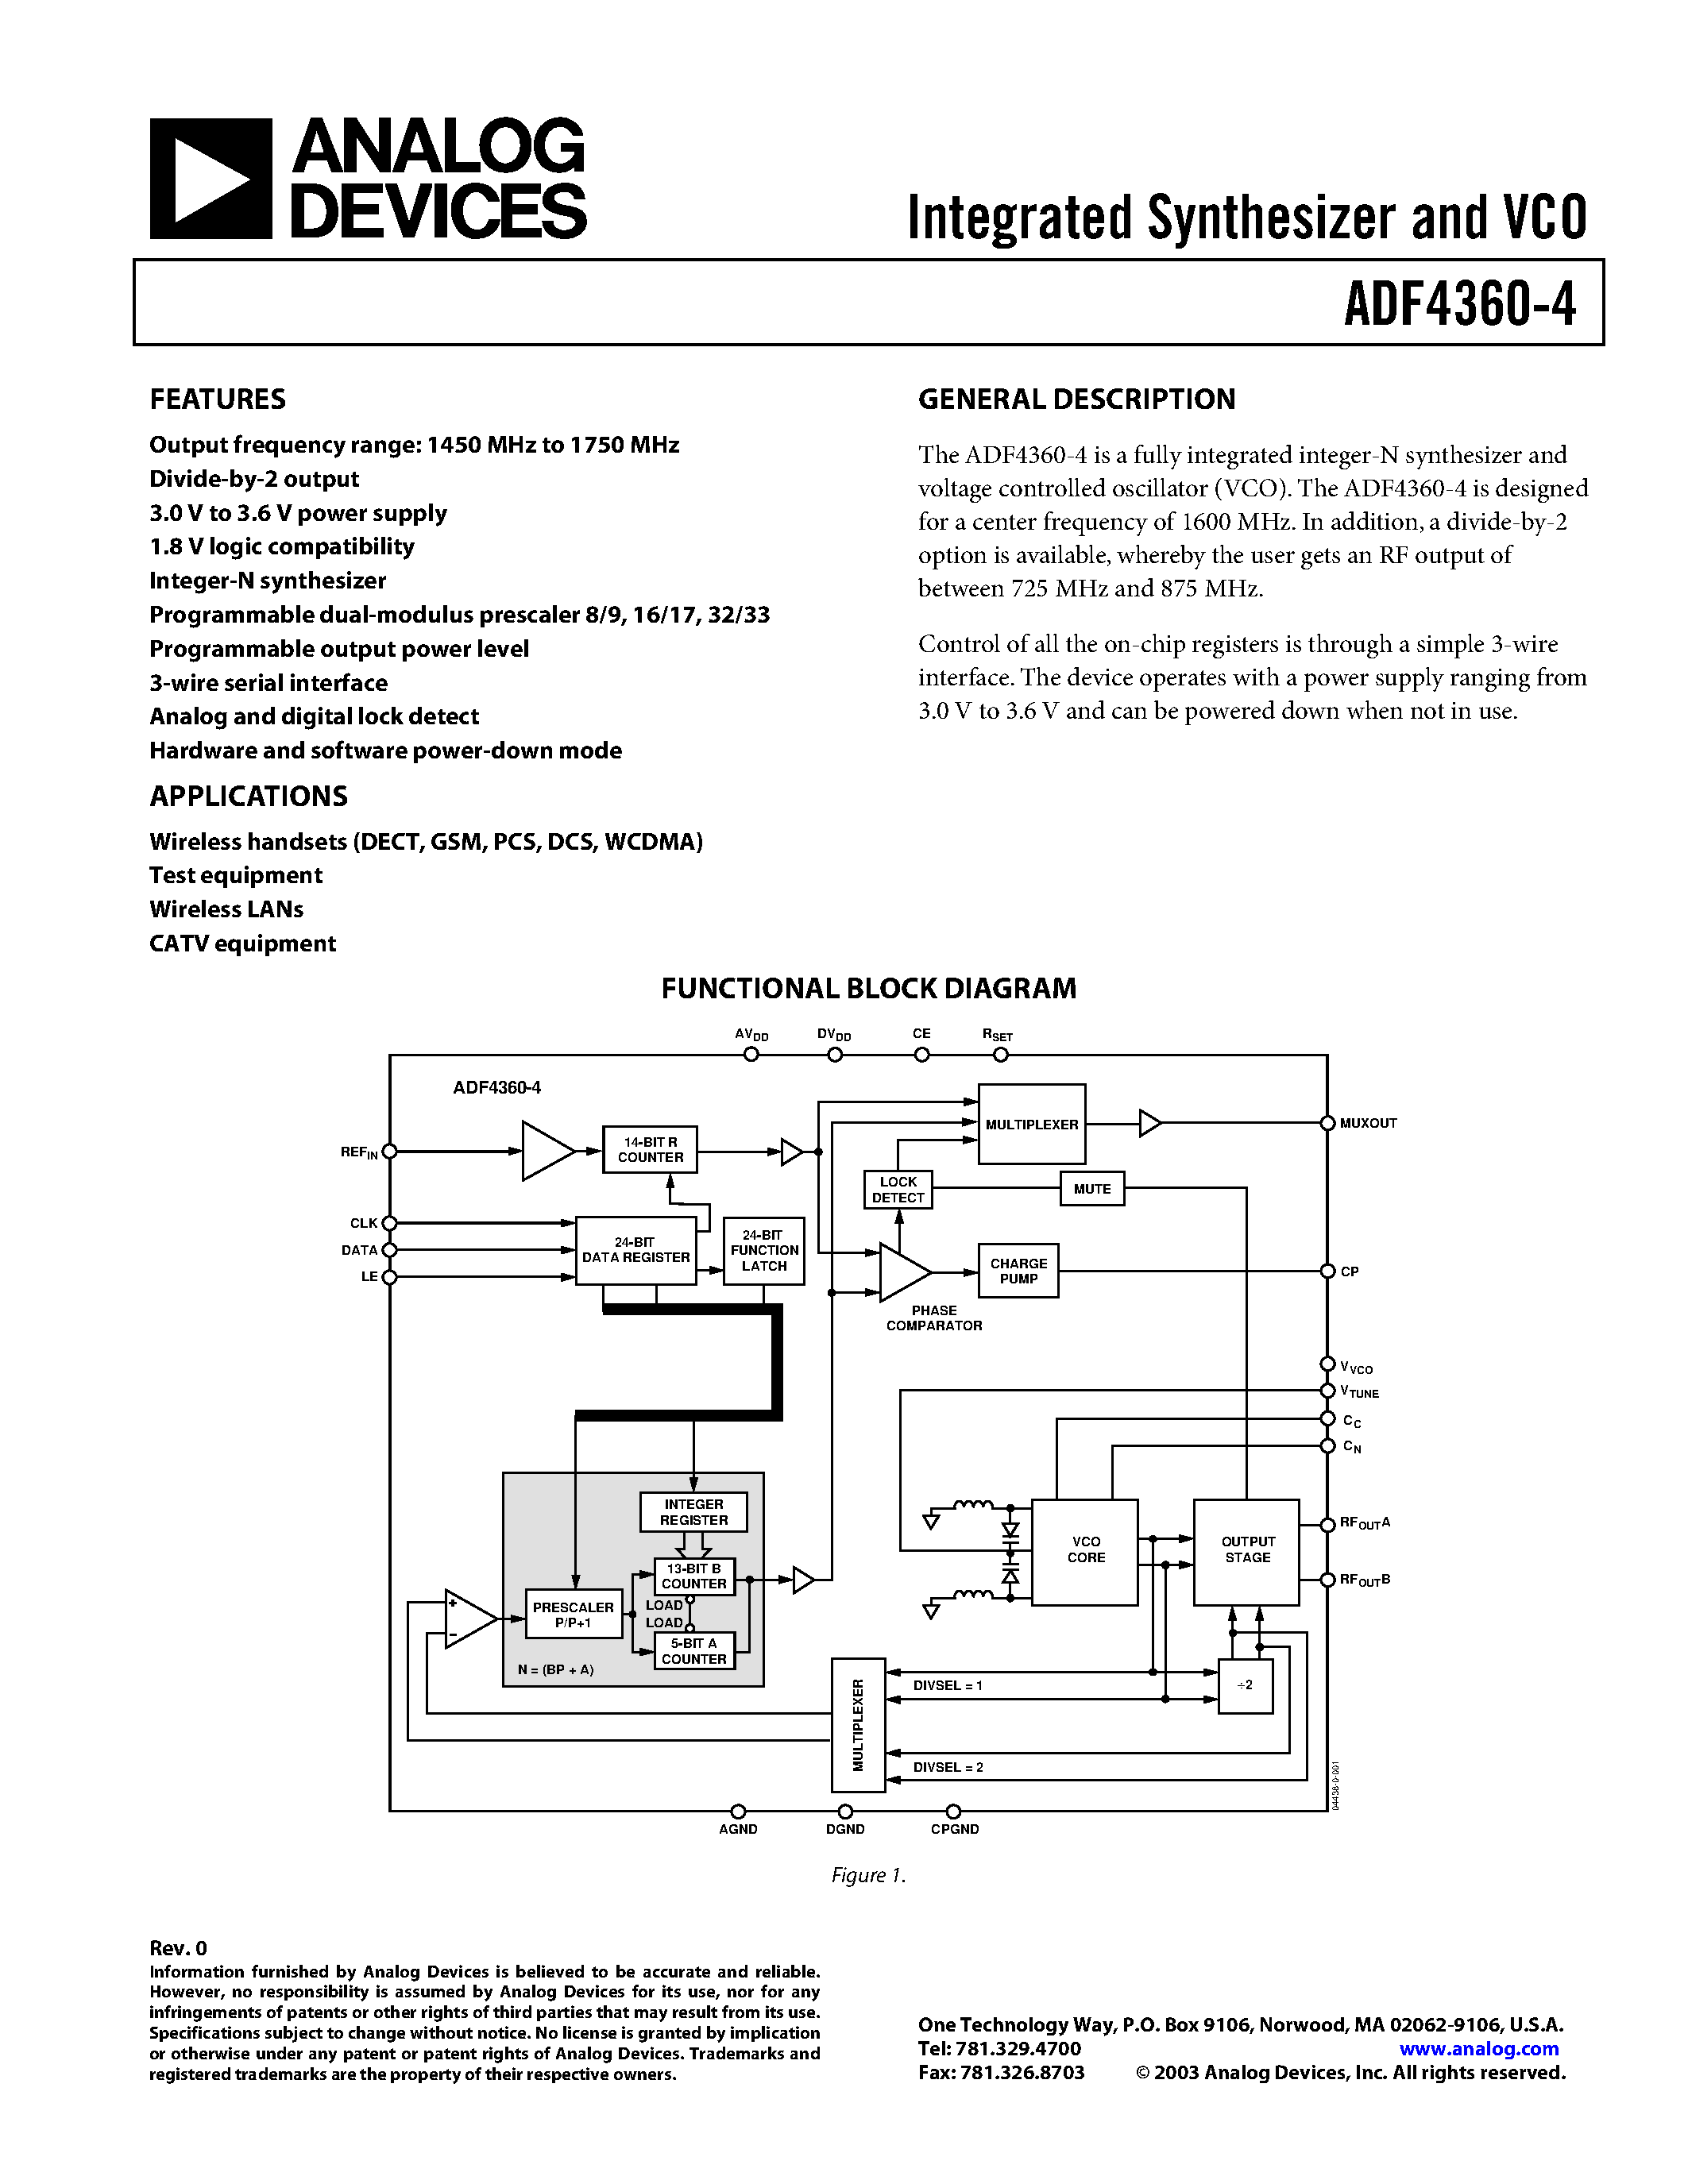 Даташит ADF4360-4BCPRL - Integrated Synthesizer and VCO страница 1